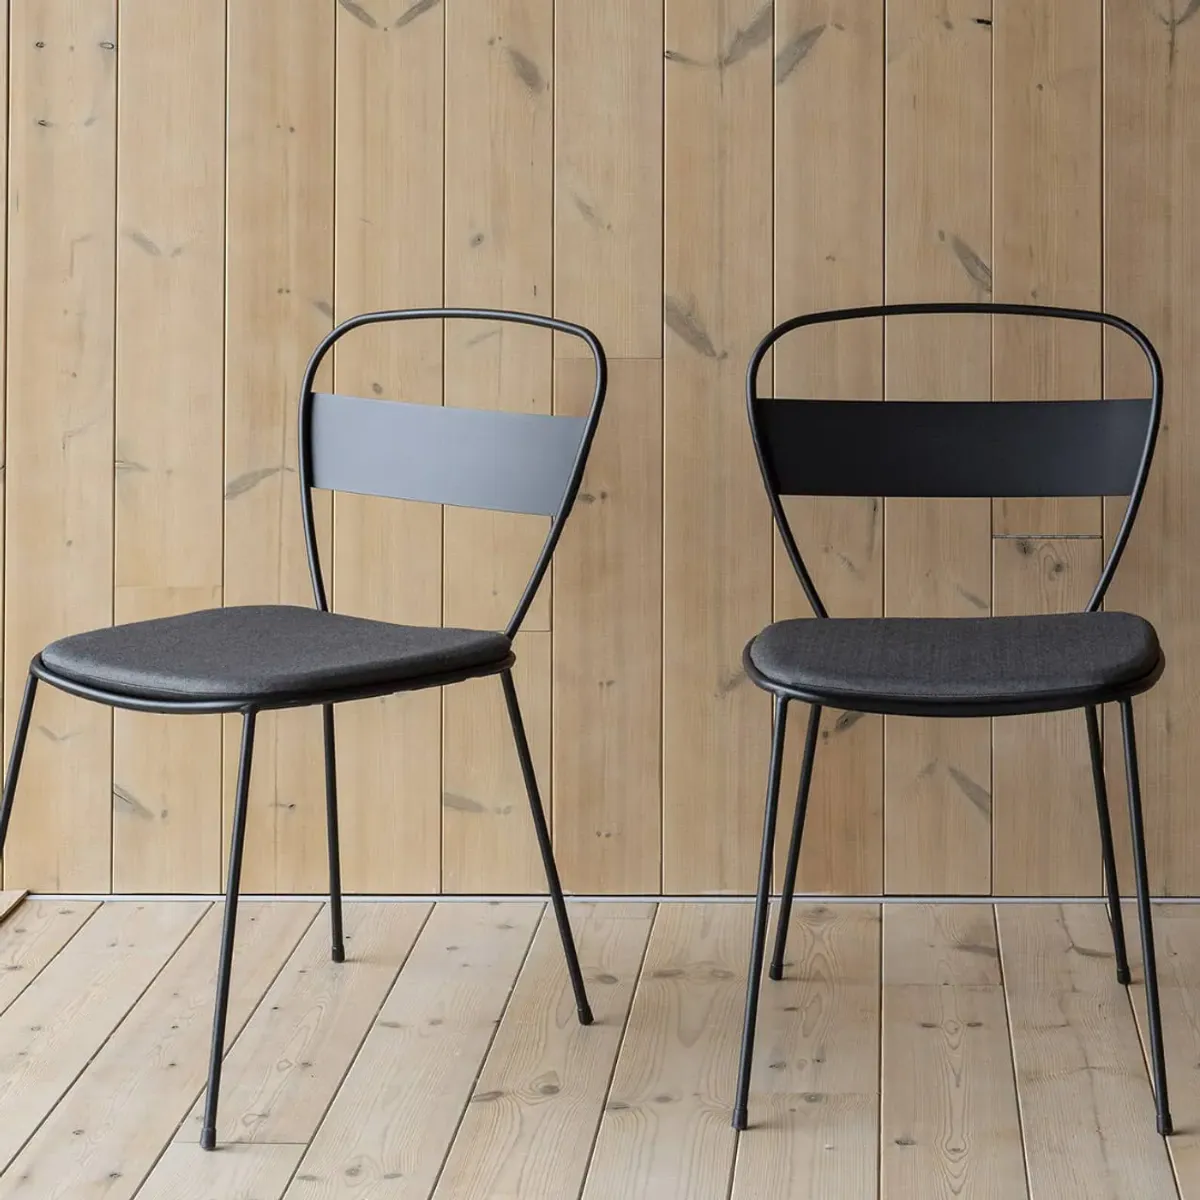 Sedna side chair 4